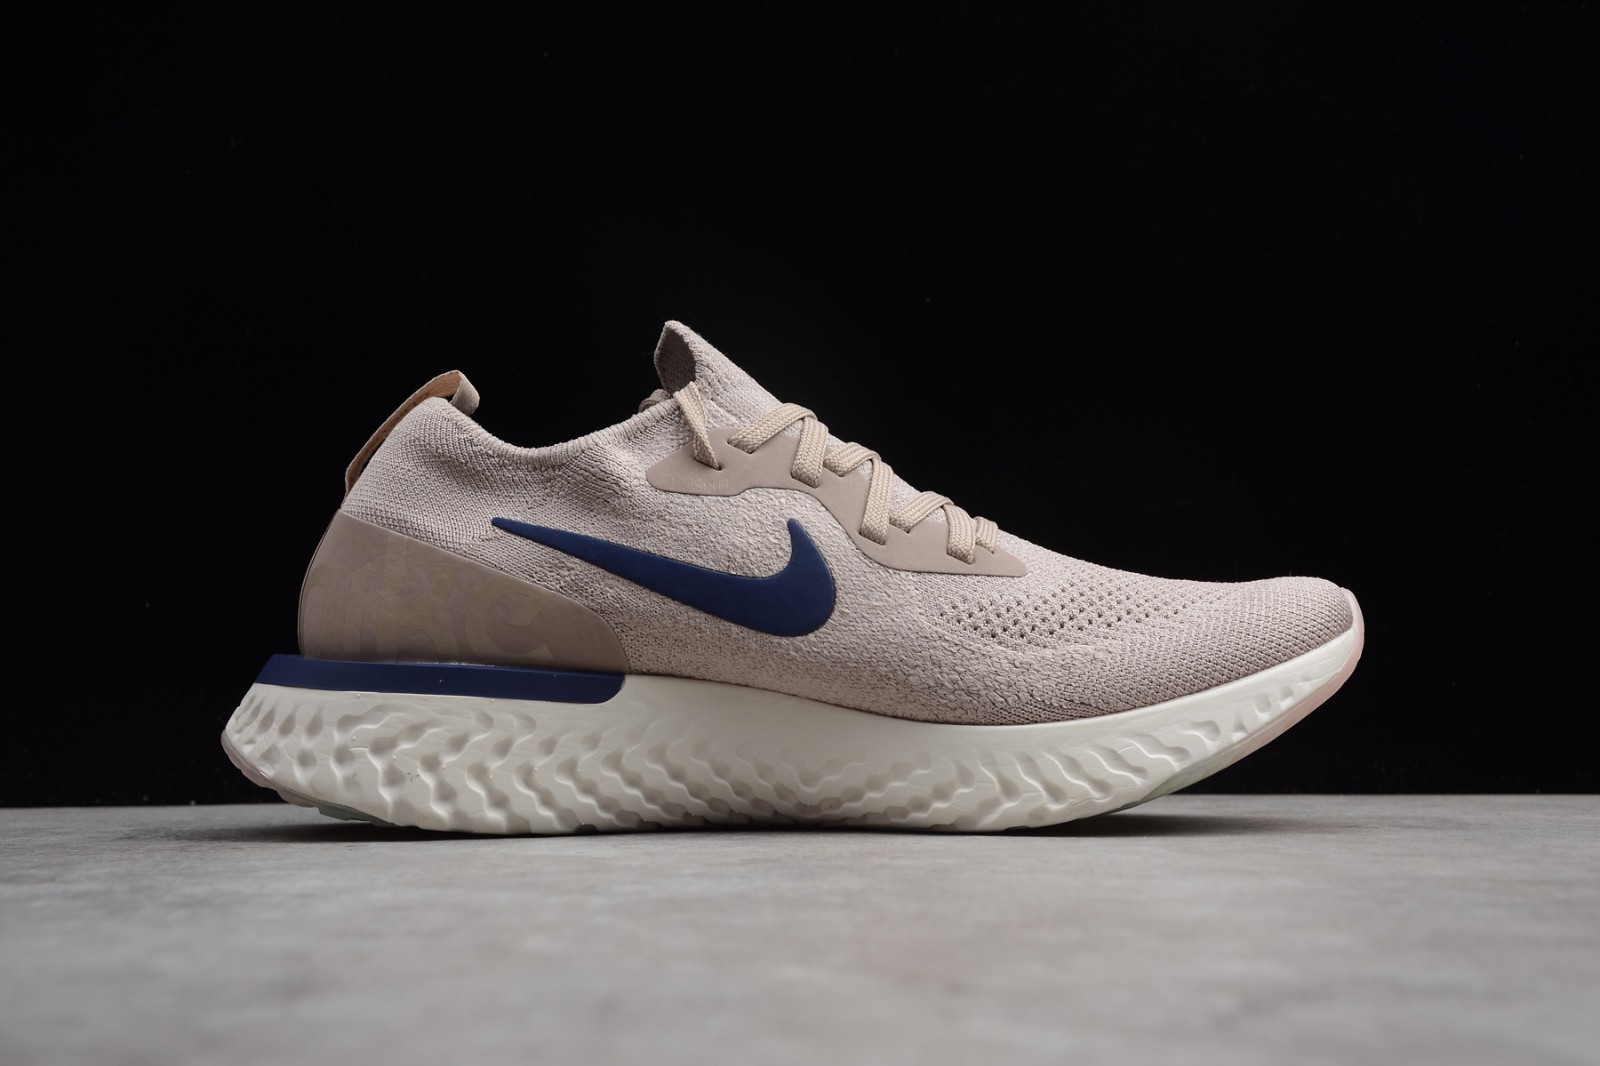 CLARYS bow-embellished ballerina shoes Neutrals - GmarShops - Nike Epic React Diffused Taupe Running Shoes AQ0067 201